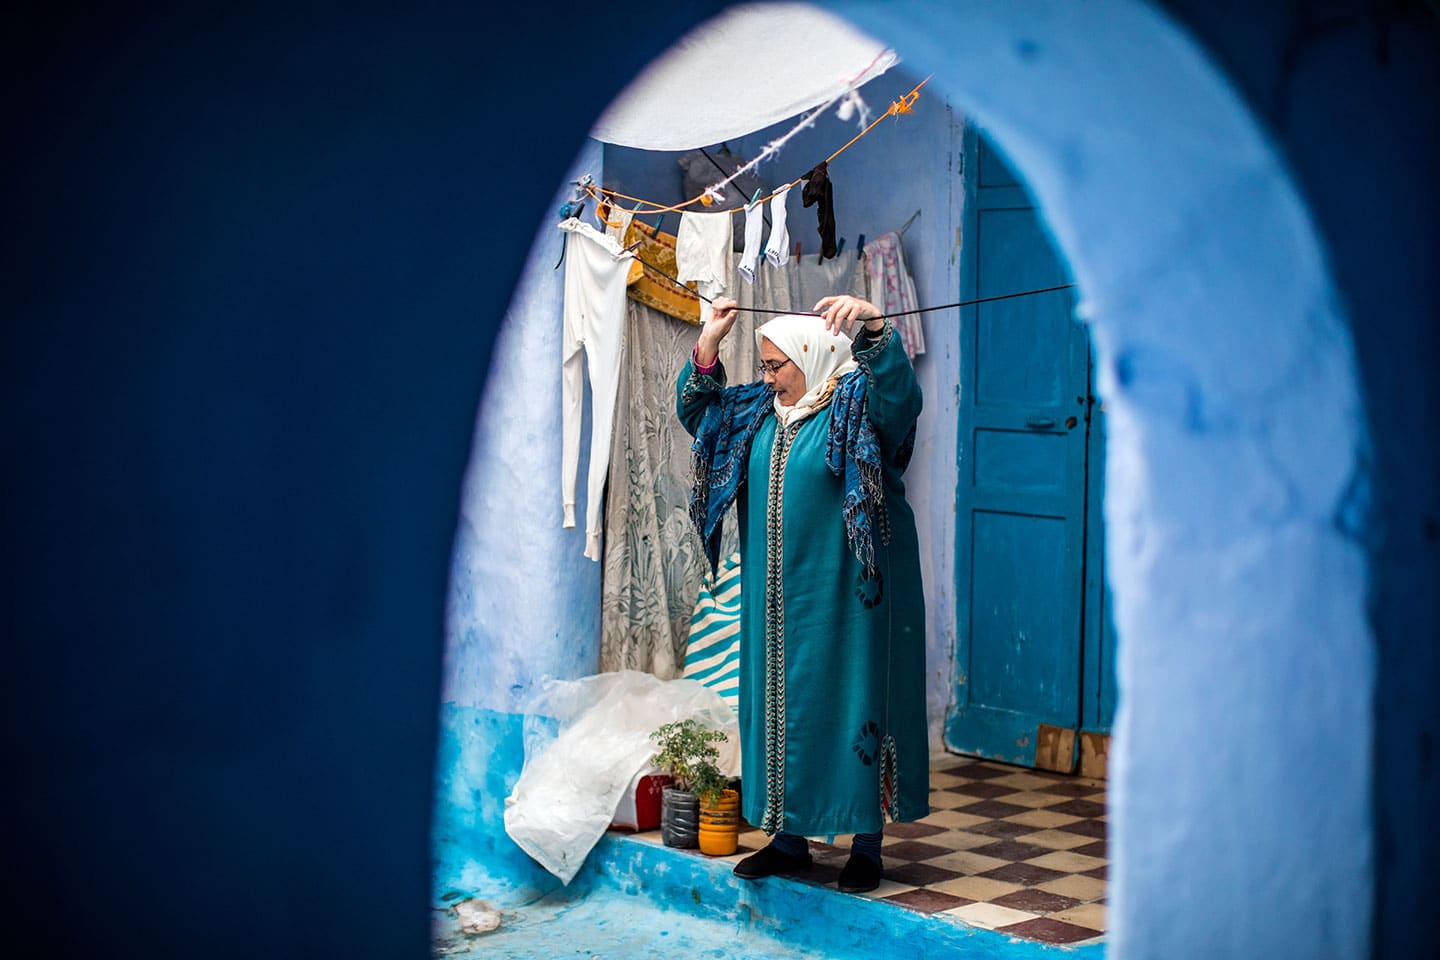 Woman hanging her laundry in the blue town of Chefchaouen, Morocco